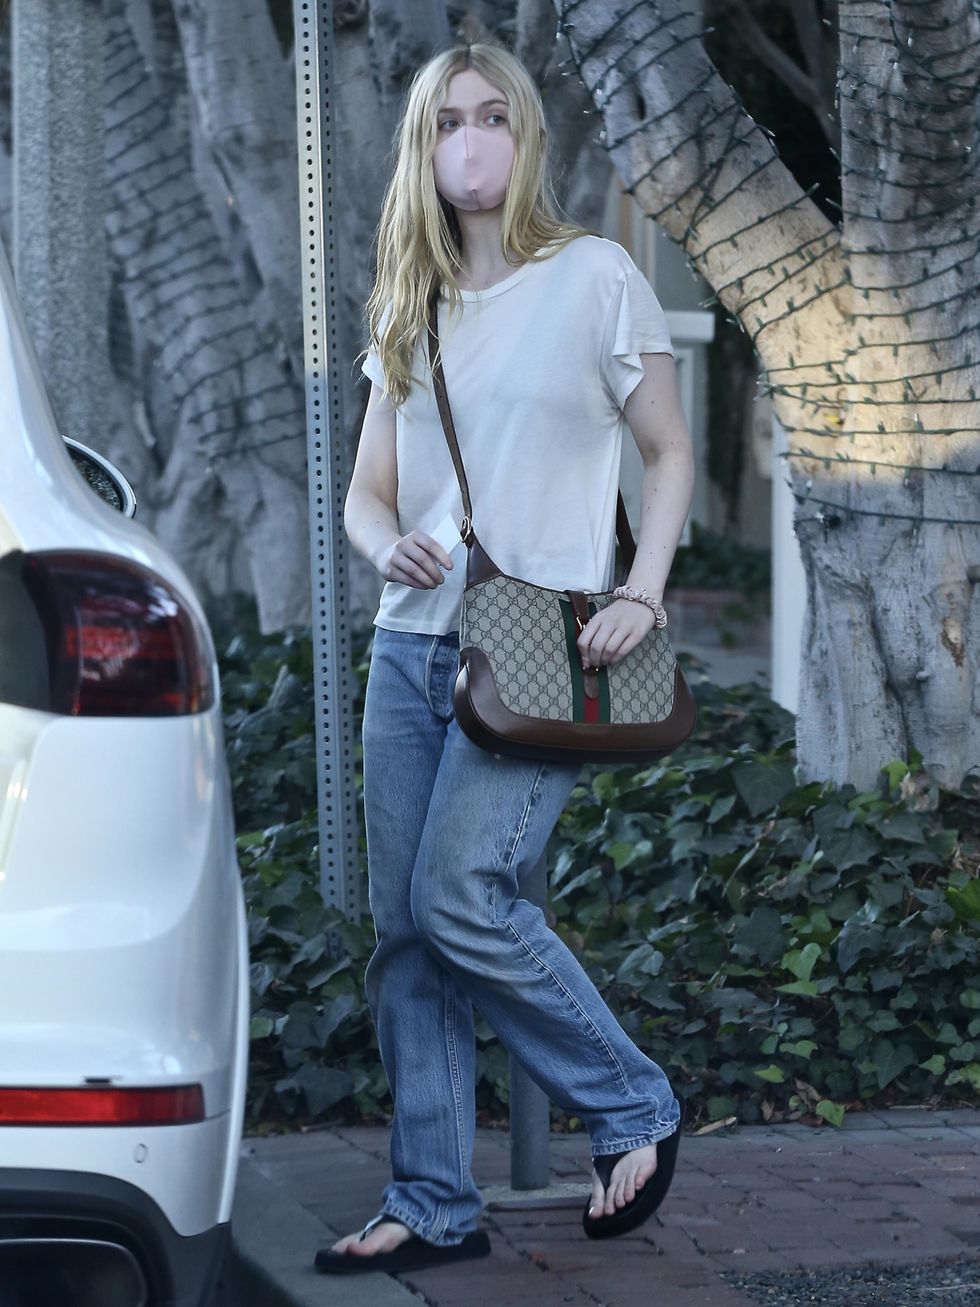 west hollywood, ca    exclusive    elle fanning keeps her ensemble simple with a white tee and jeans while out getting some christmas shopping done in wehopictured elle fanningbackgrid usa 18 december 2020 usa 1 310 798 9111  usasalesbackgridcomuk 44 208 344 2007  uksalesbackgridcomuk clients   pictures containing childrenplease pixelate face prior to publication